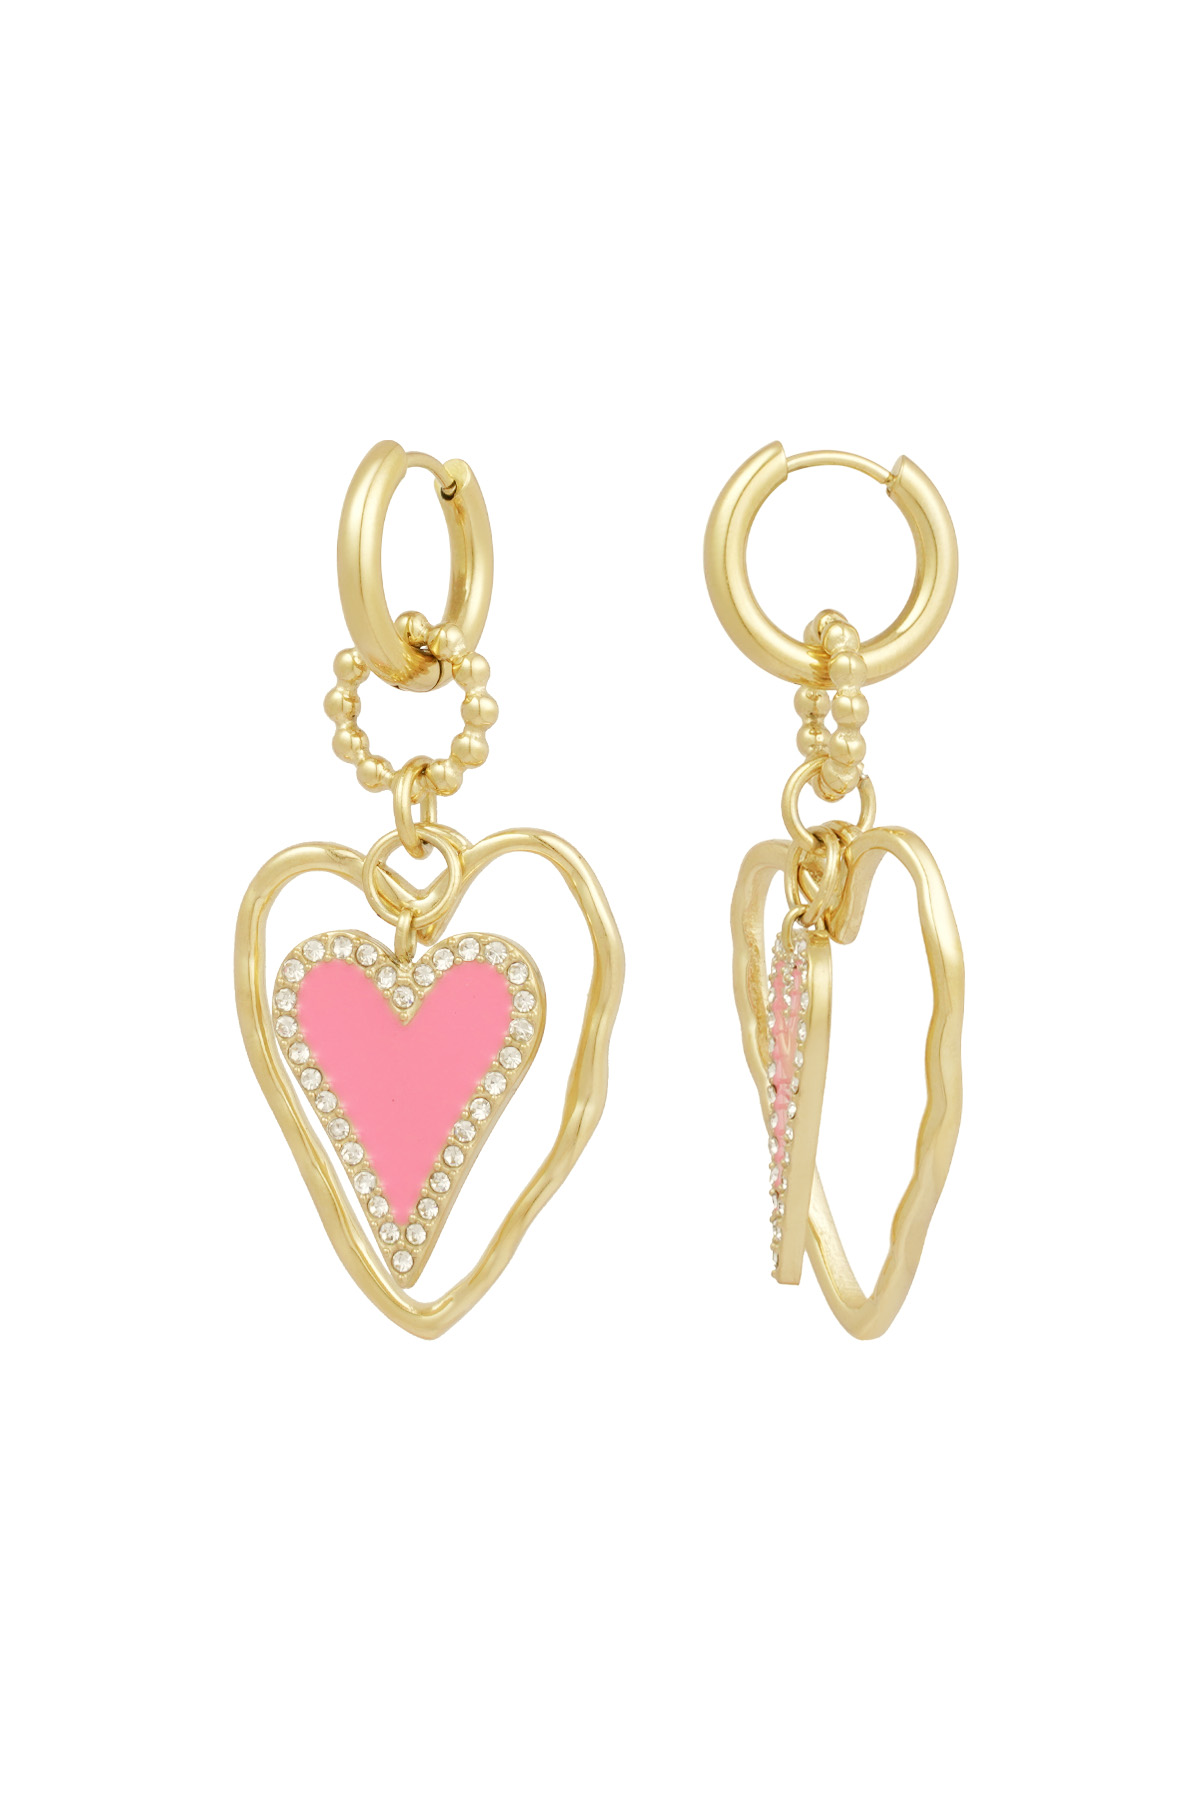 Earrings lovers madhouse - pink gold h5 